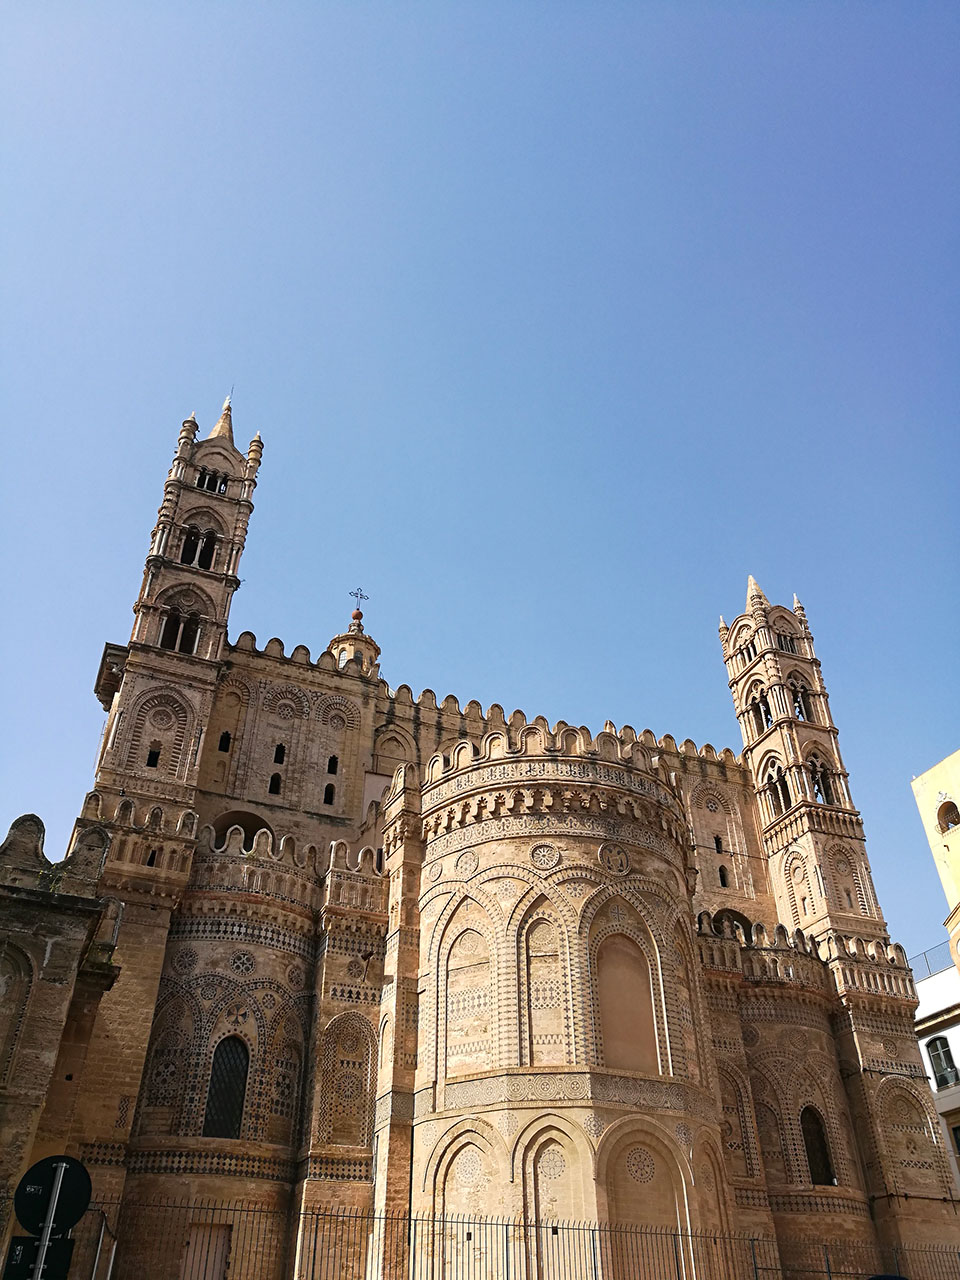 side part of the cathedral of Palermo